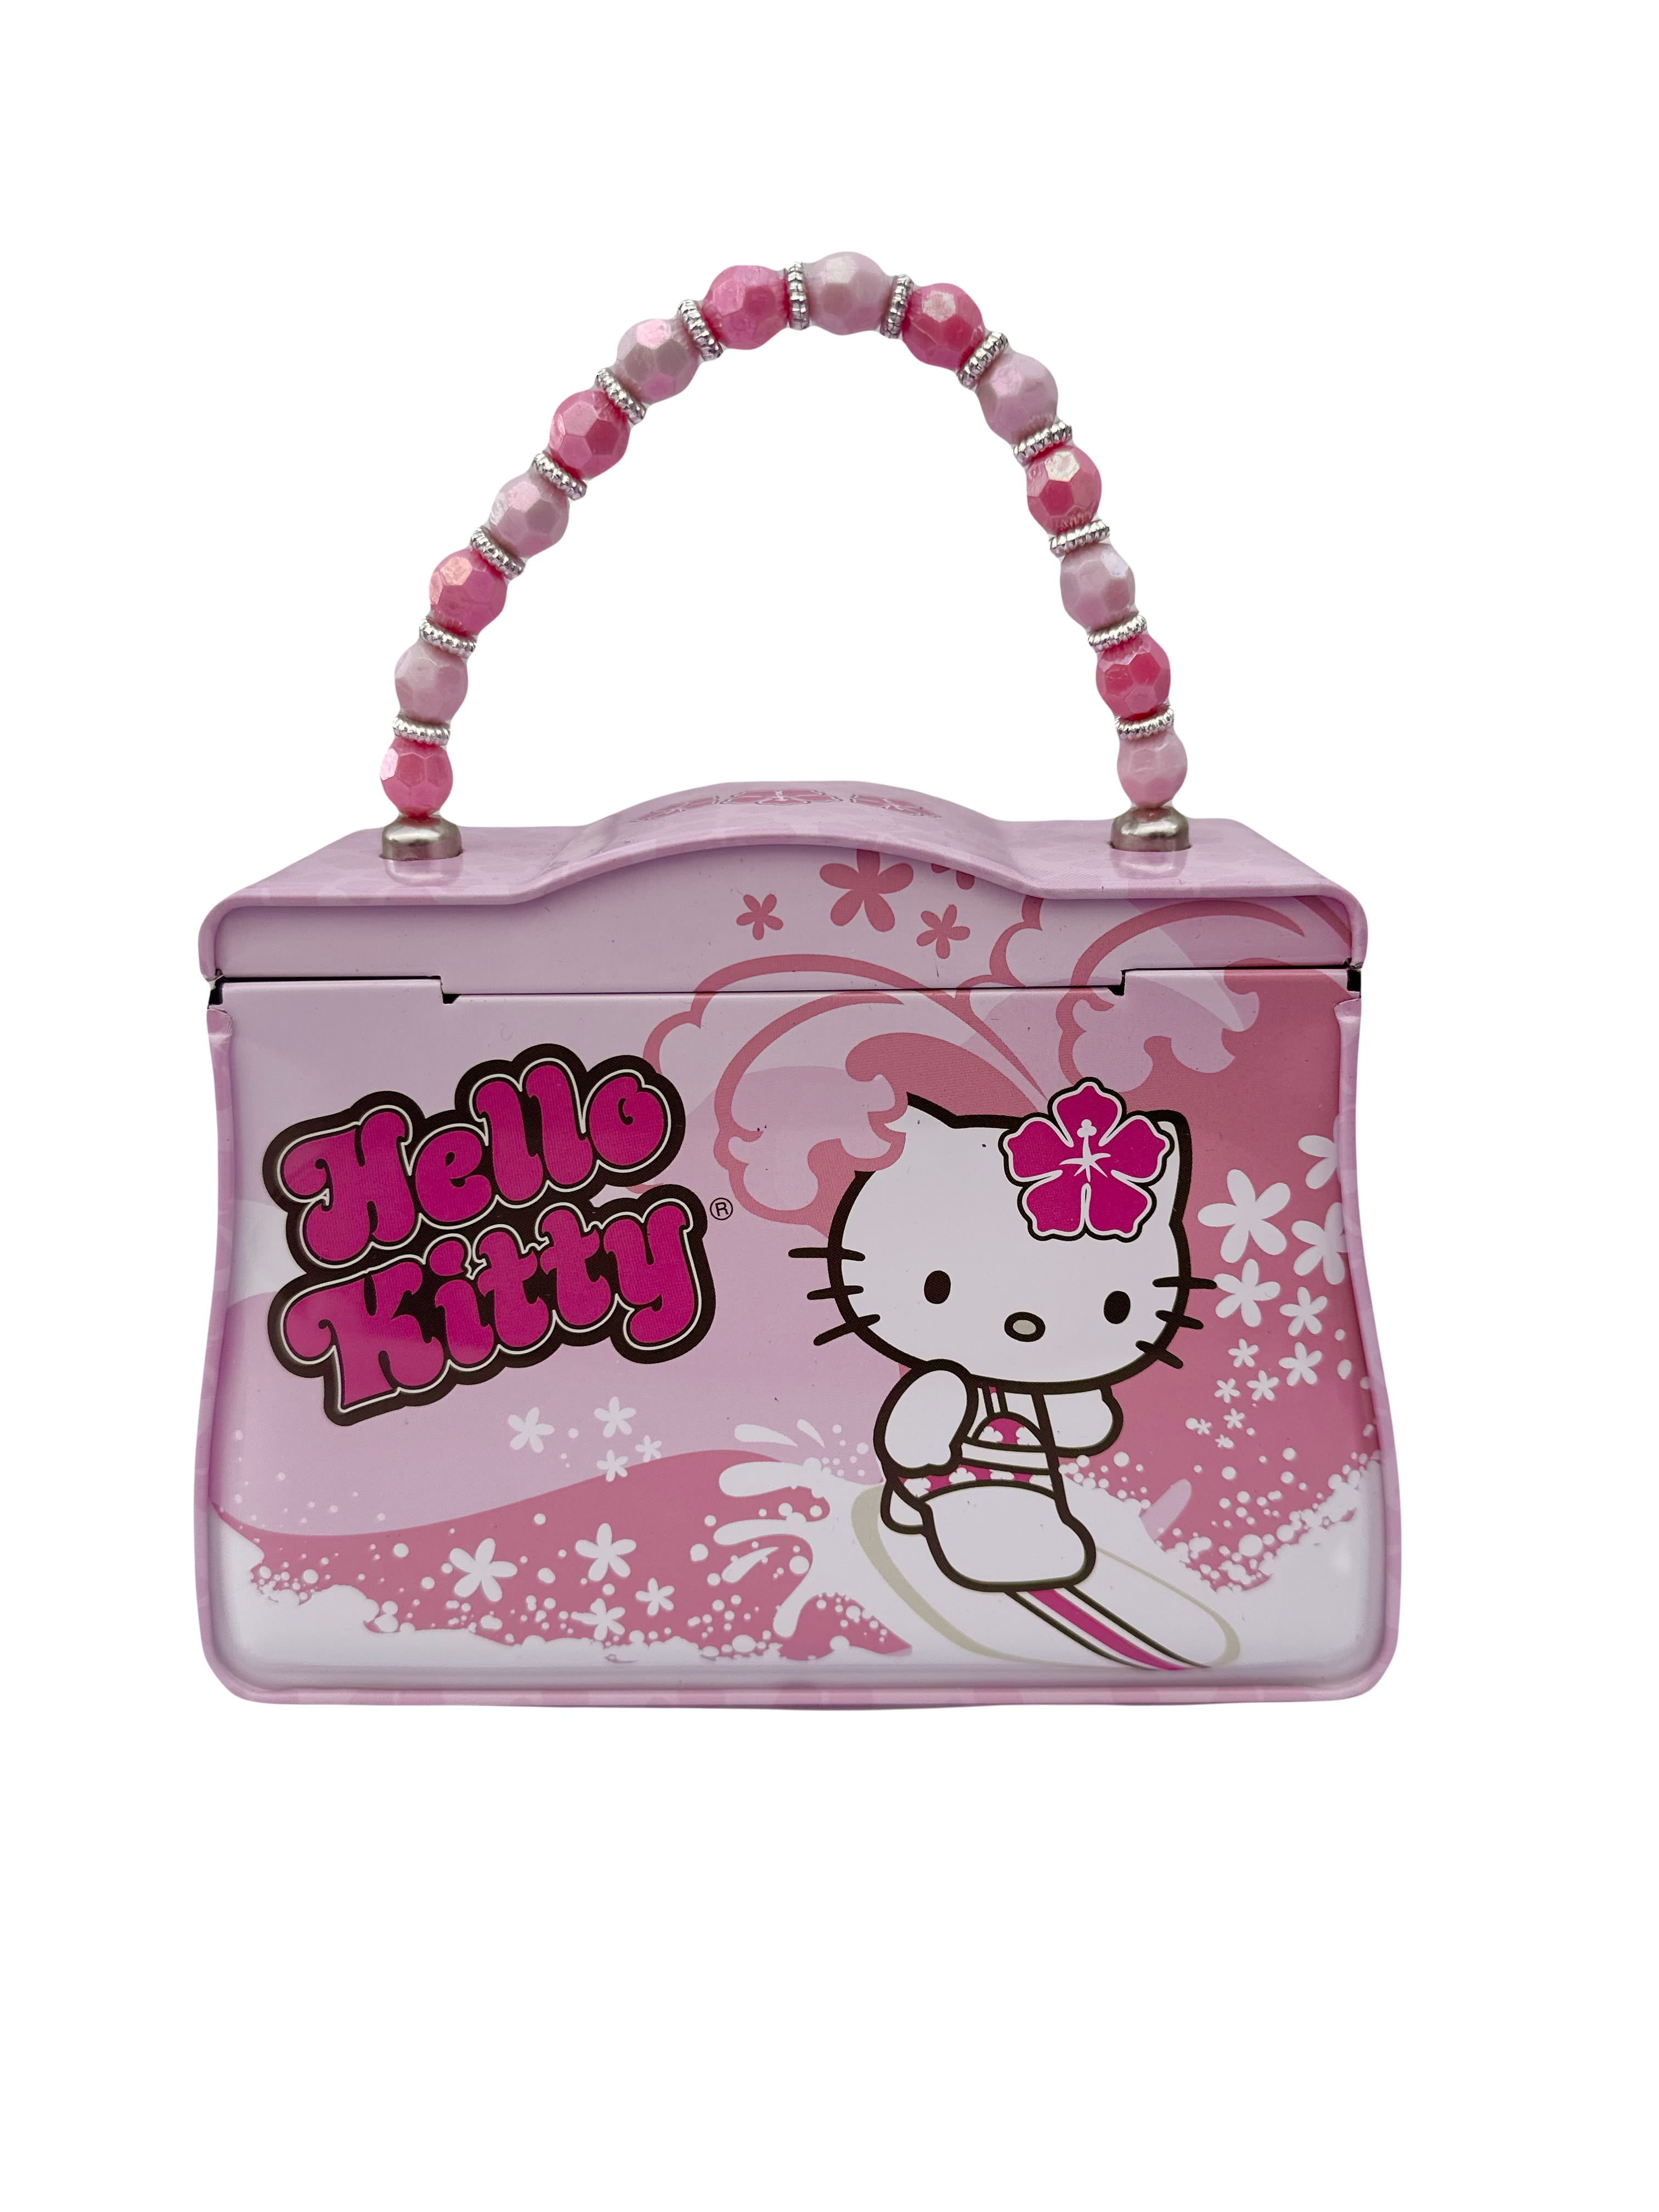 THE TIN BOX COMPANY HELLO KITTY XL TIN LUNCHBOX WITH WINDOW - NEW MINT  CONDITION